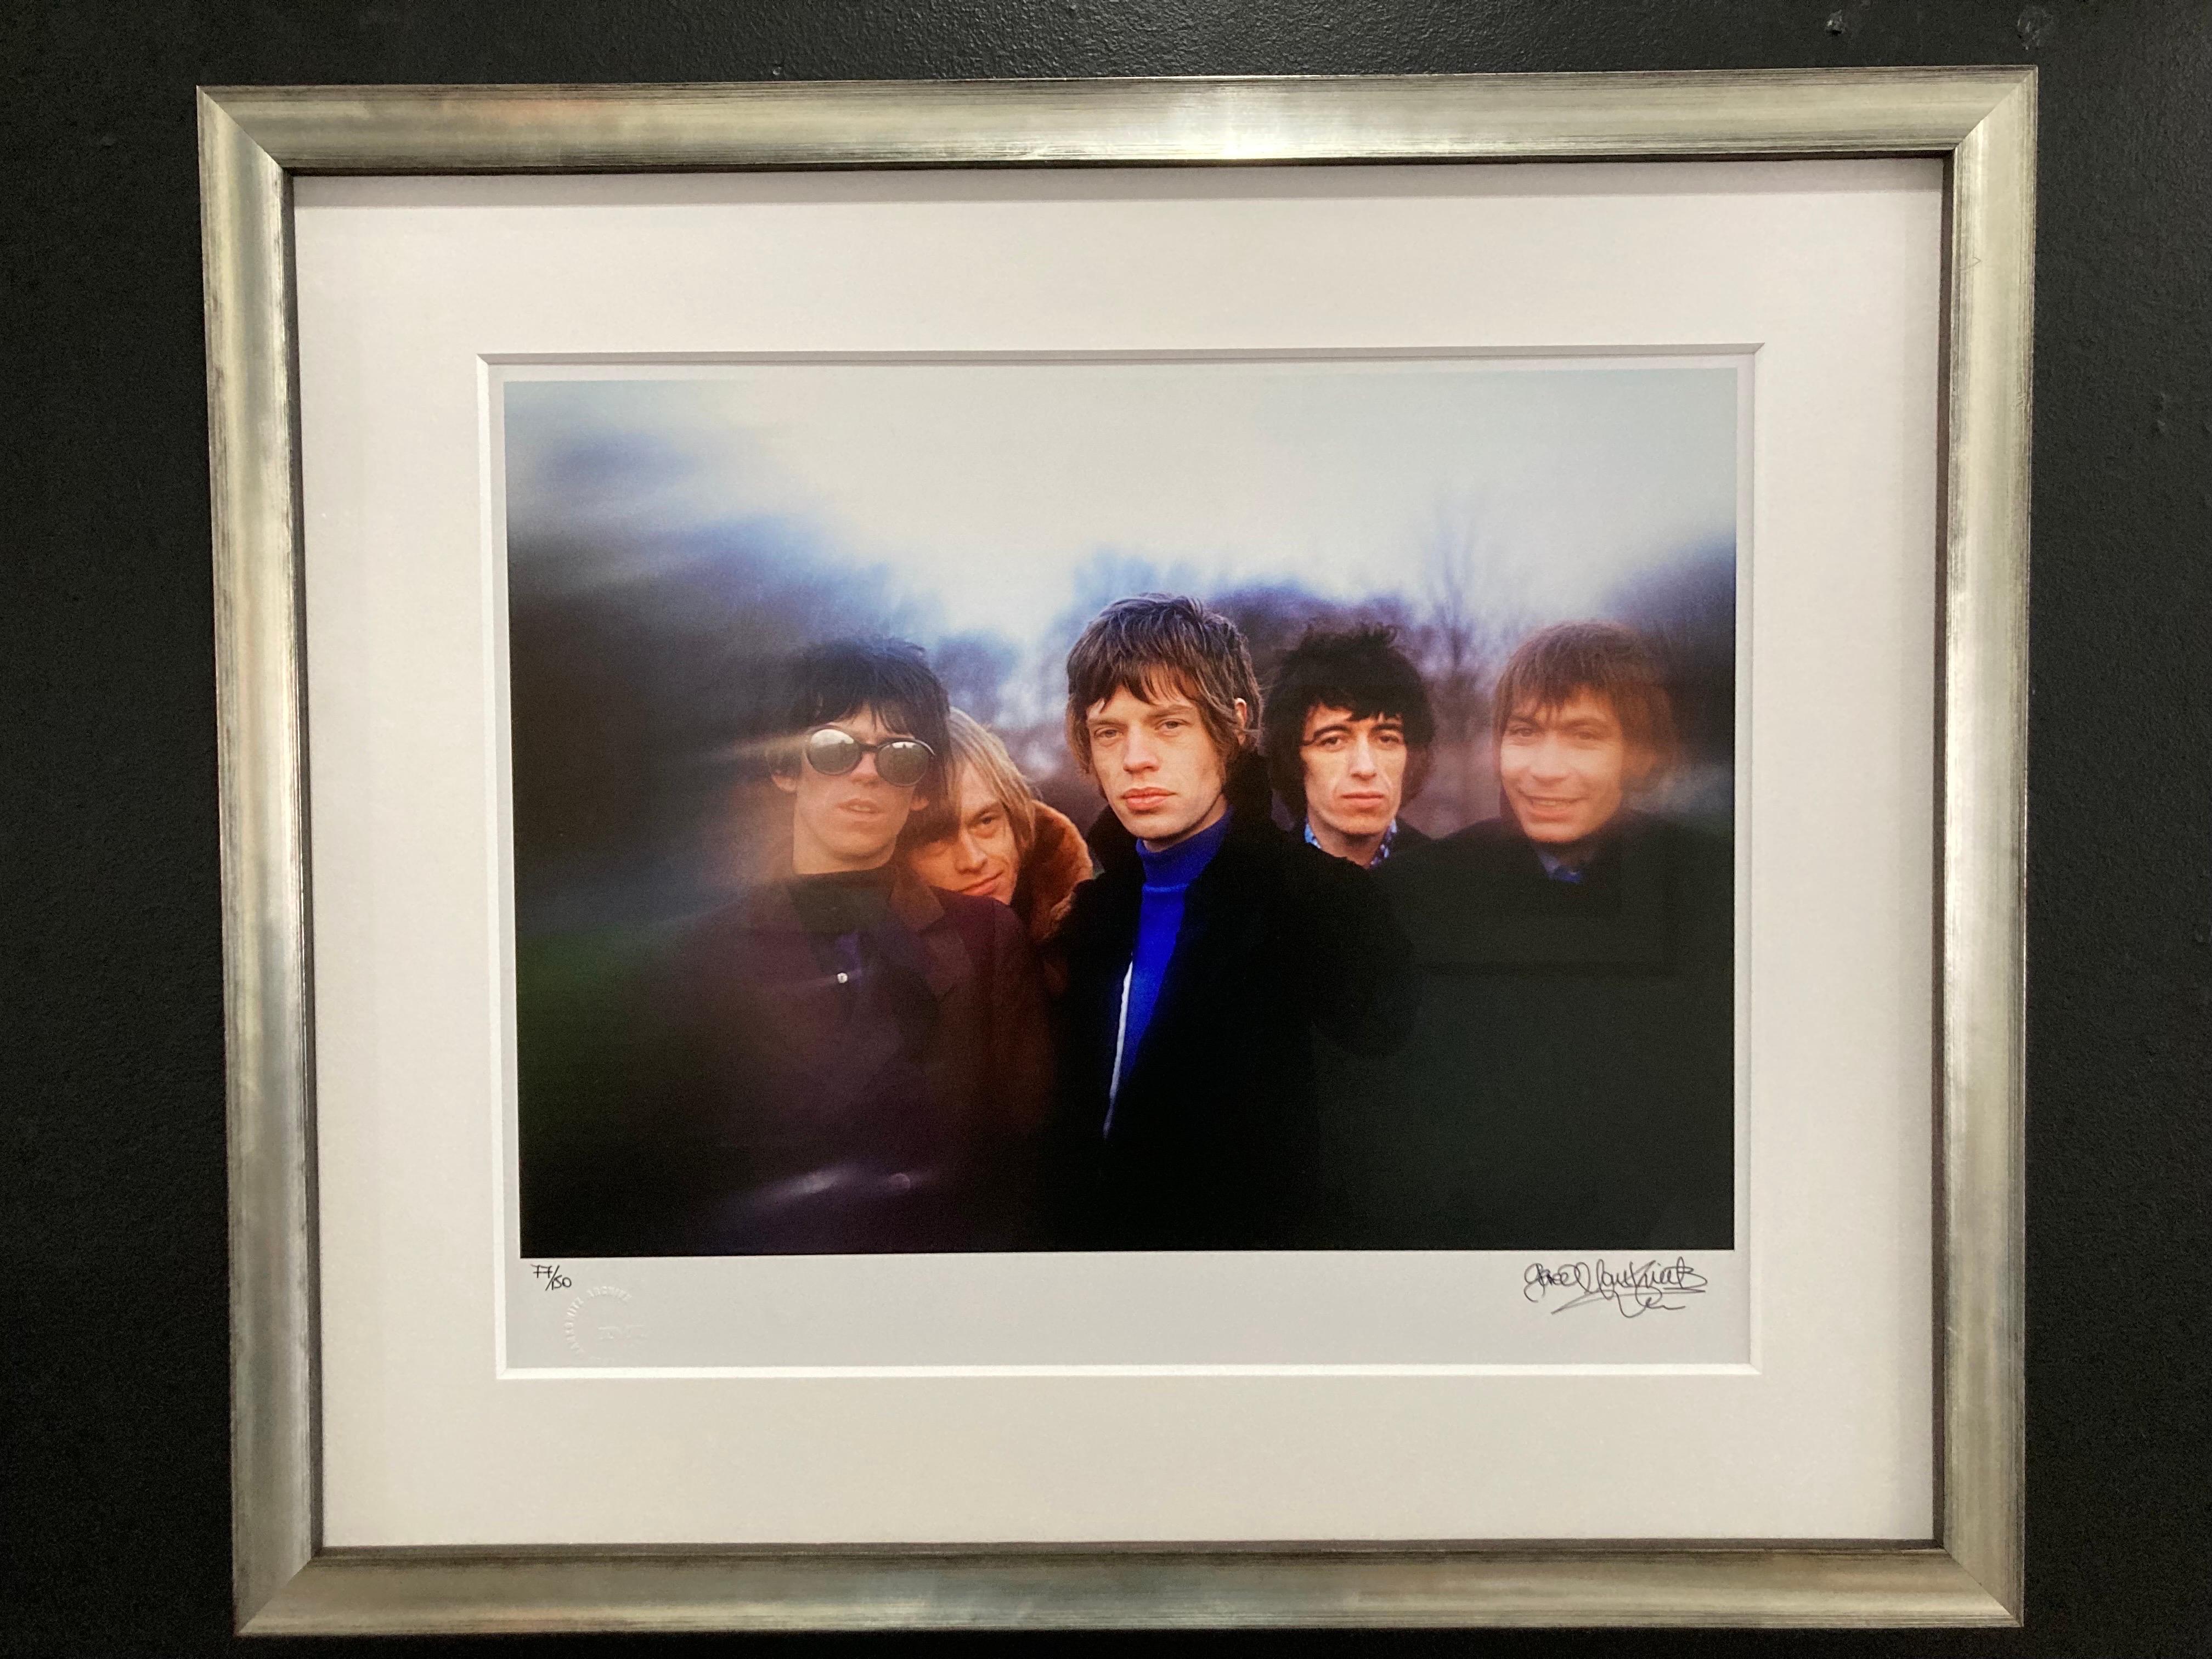 The Rolling Stones "Between The Buttons" outtake by Gered Mankowitz framed